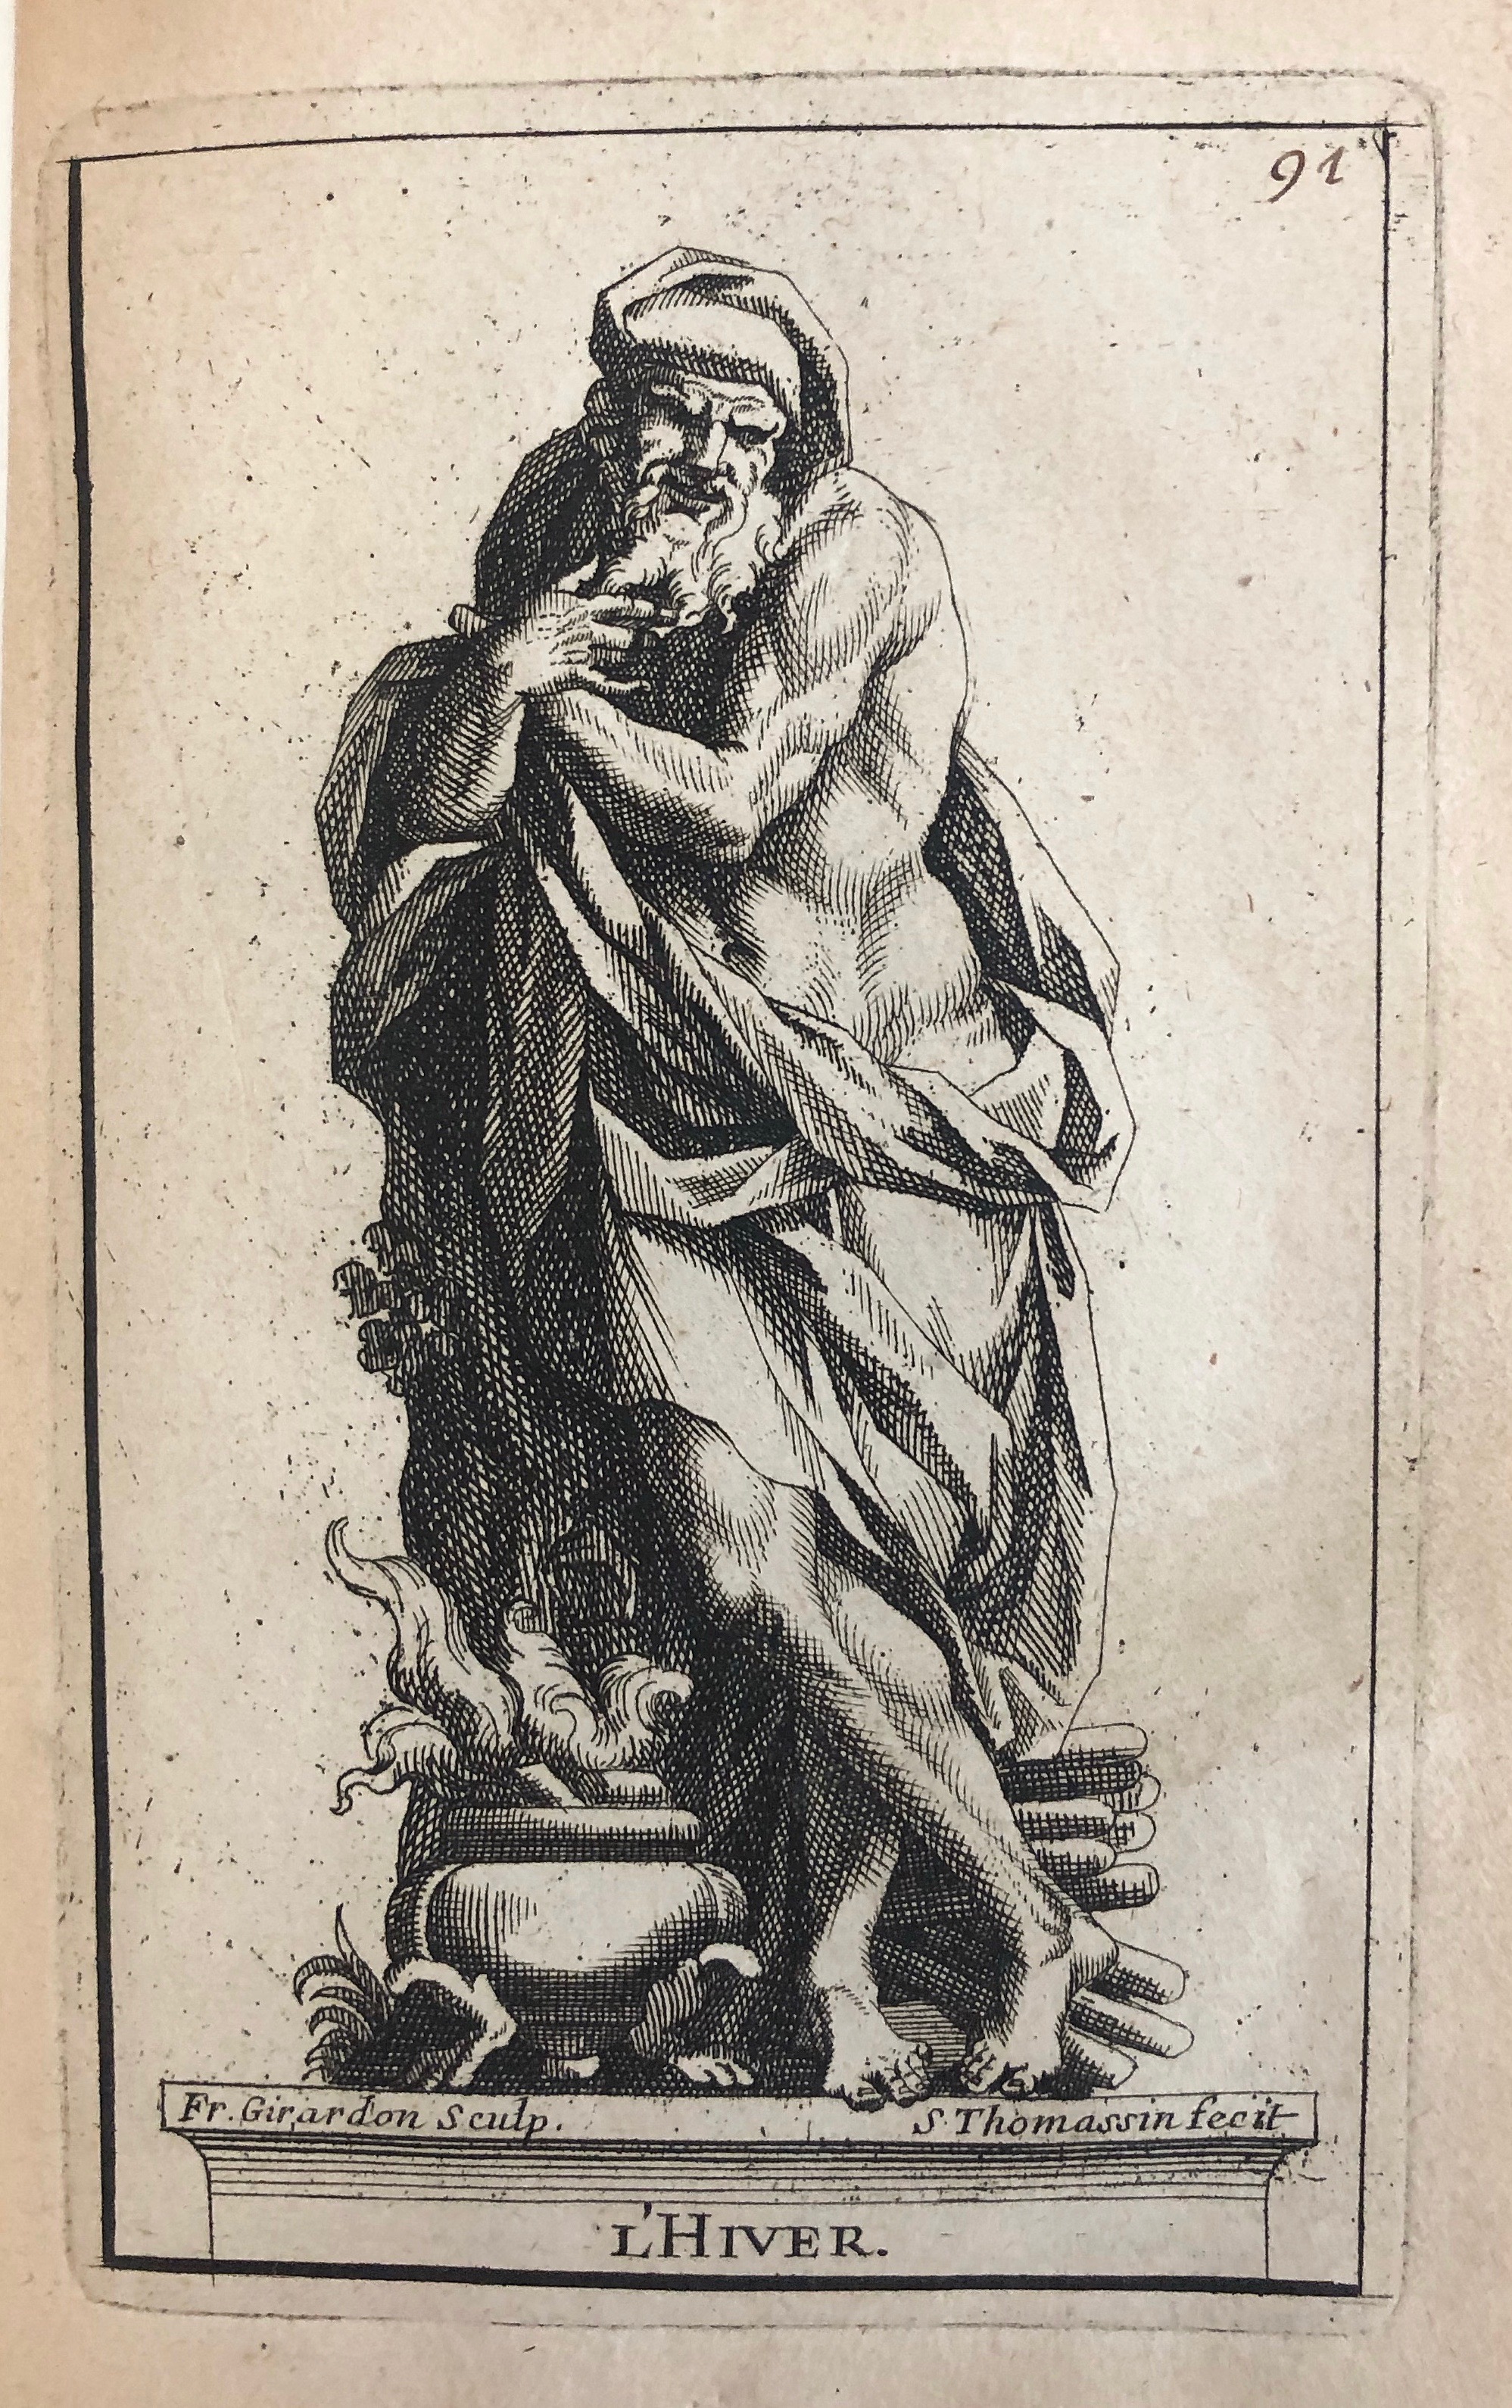 Image features a print showing an allegorical figure of winter, a be-robed and bearded muscular old man, standing, leaning to his right, warming himself above the fire in a container at his feet. Please scroll down to read the blog post about this object.